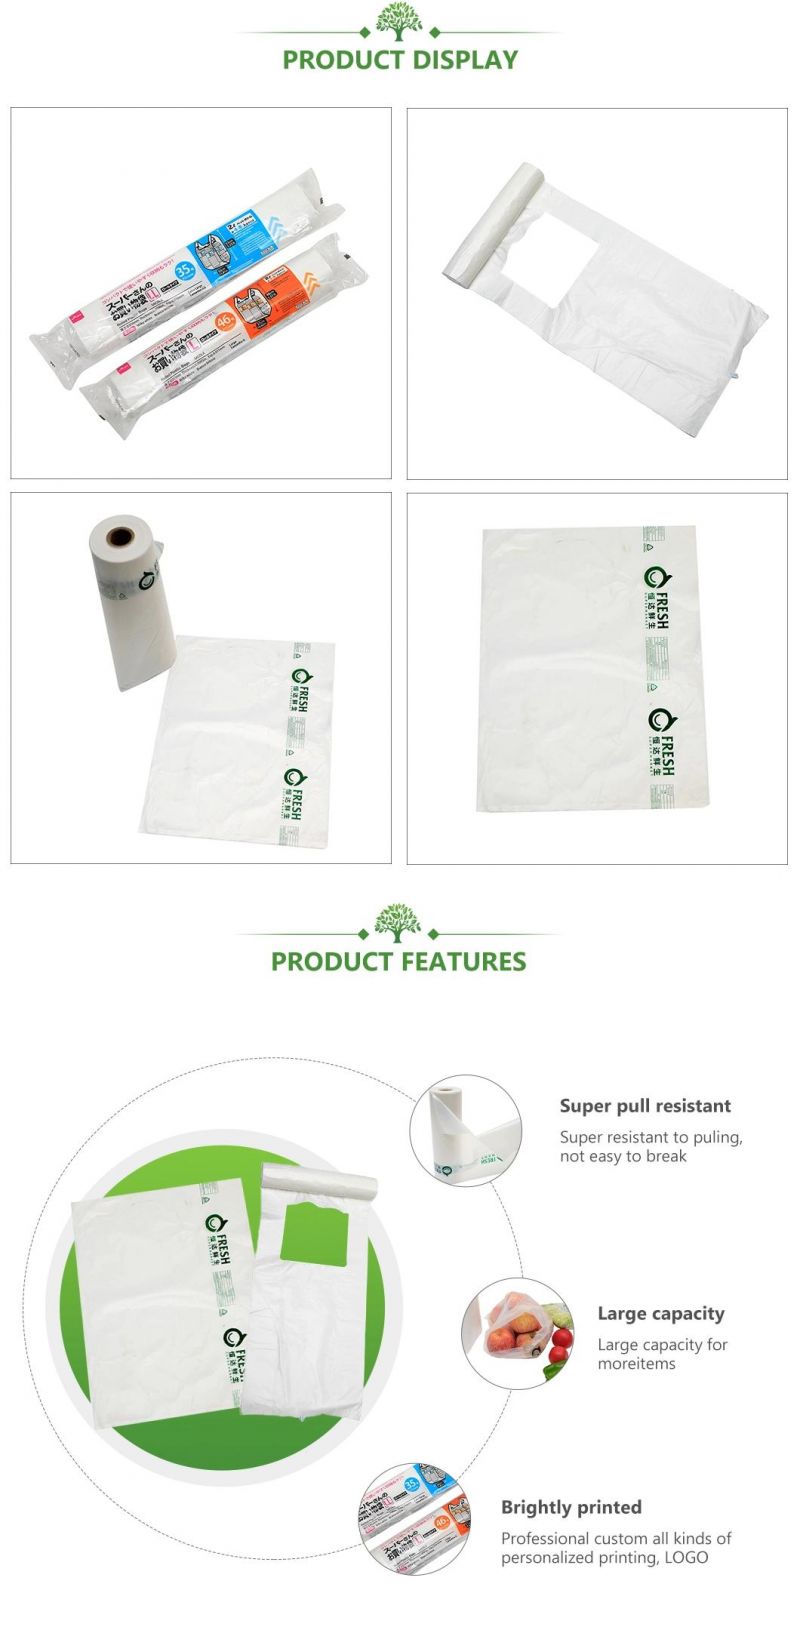 Custom Biodegradable and Compostable Produce Bags/Roll/T-Shirt/Vest/Hand/Shopping/Supermarket/Flat/Trash/Mailer/Pet Poop/Food/Bread Bags Manufacturer with FDA